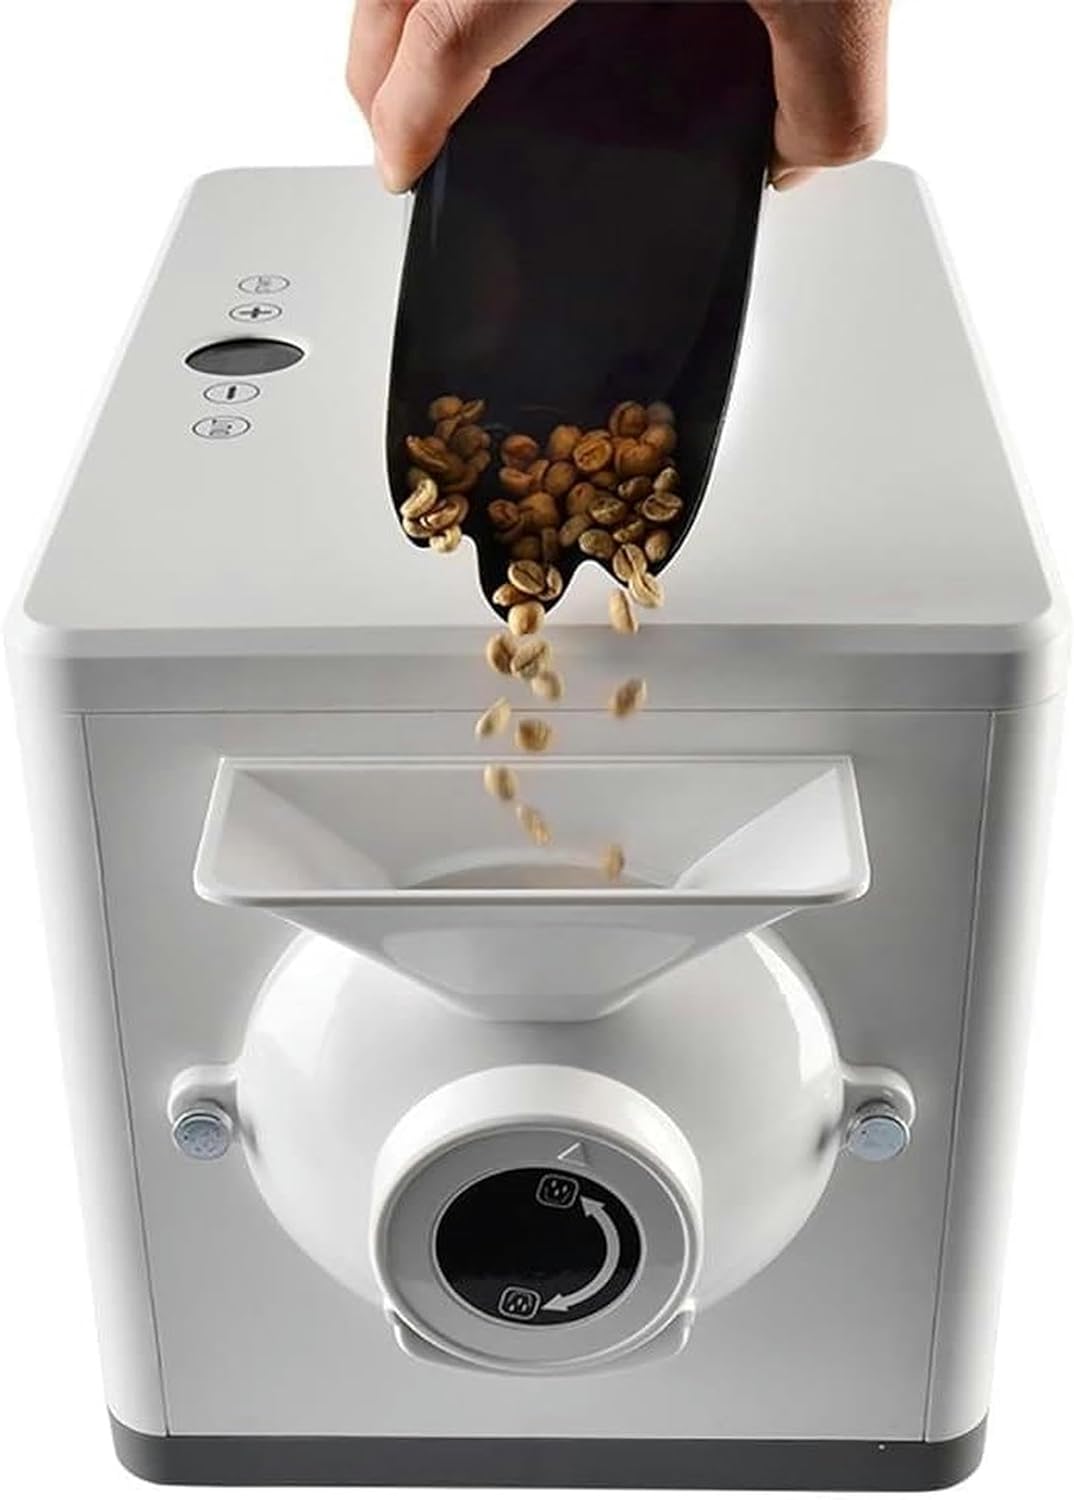 Cnaohghn Commercial Coffee Roasting Machine, 1500G Automatic Coffee Bean Roaster,Stainless Steel Liner,Timing (30S-90Min) + Temperature Control (100℃-250℃),1600W,360°Even Heating